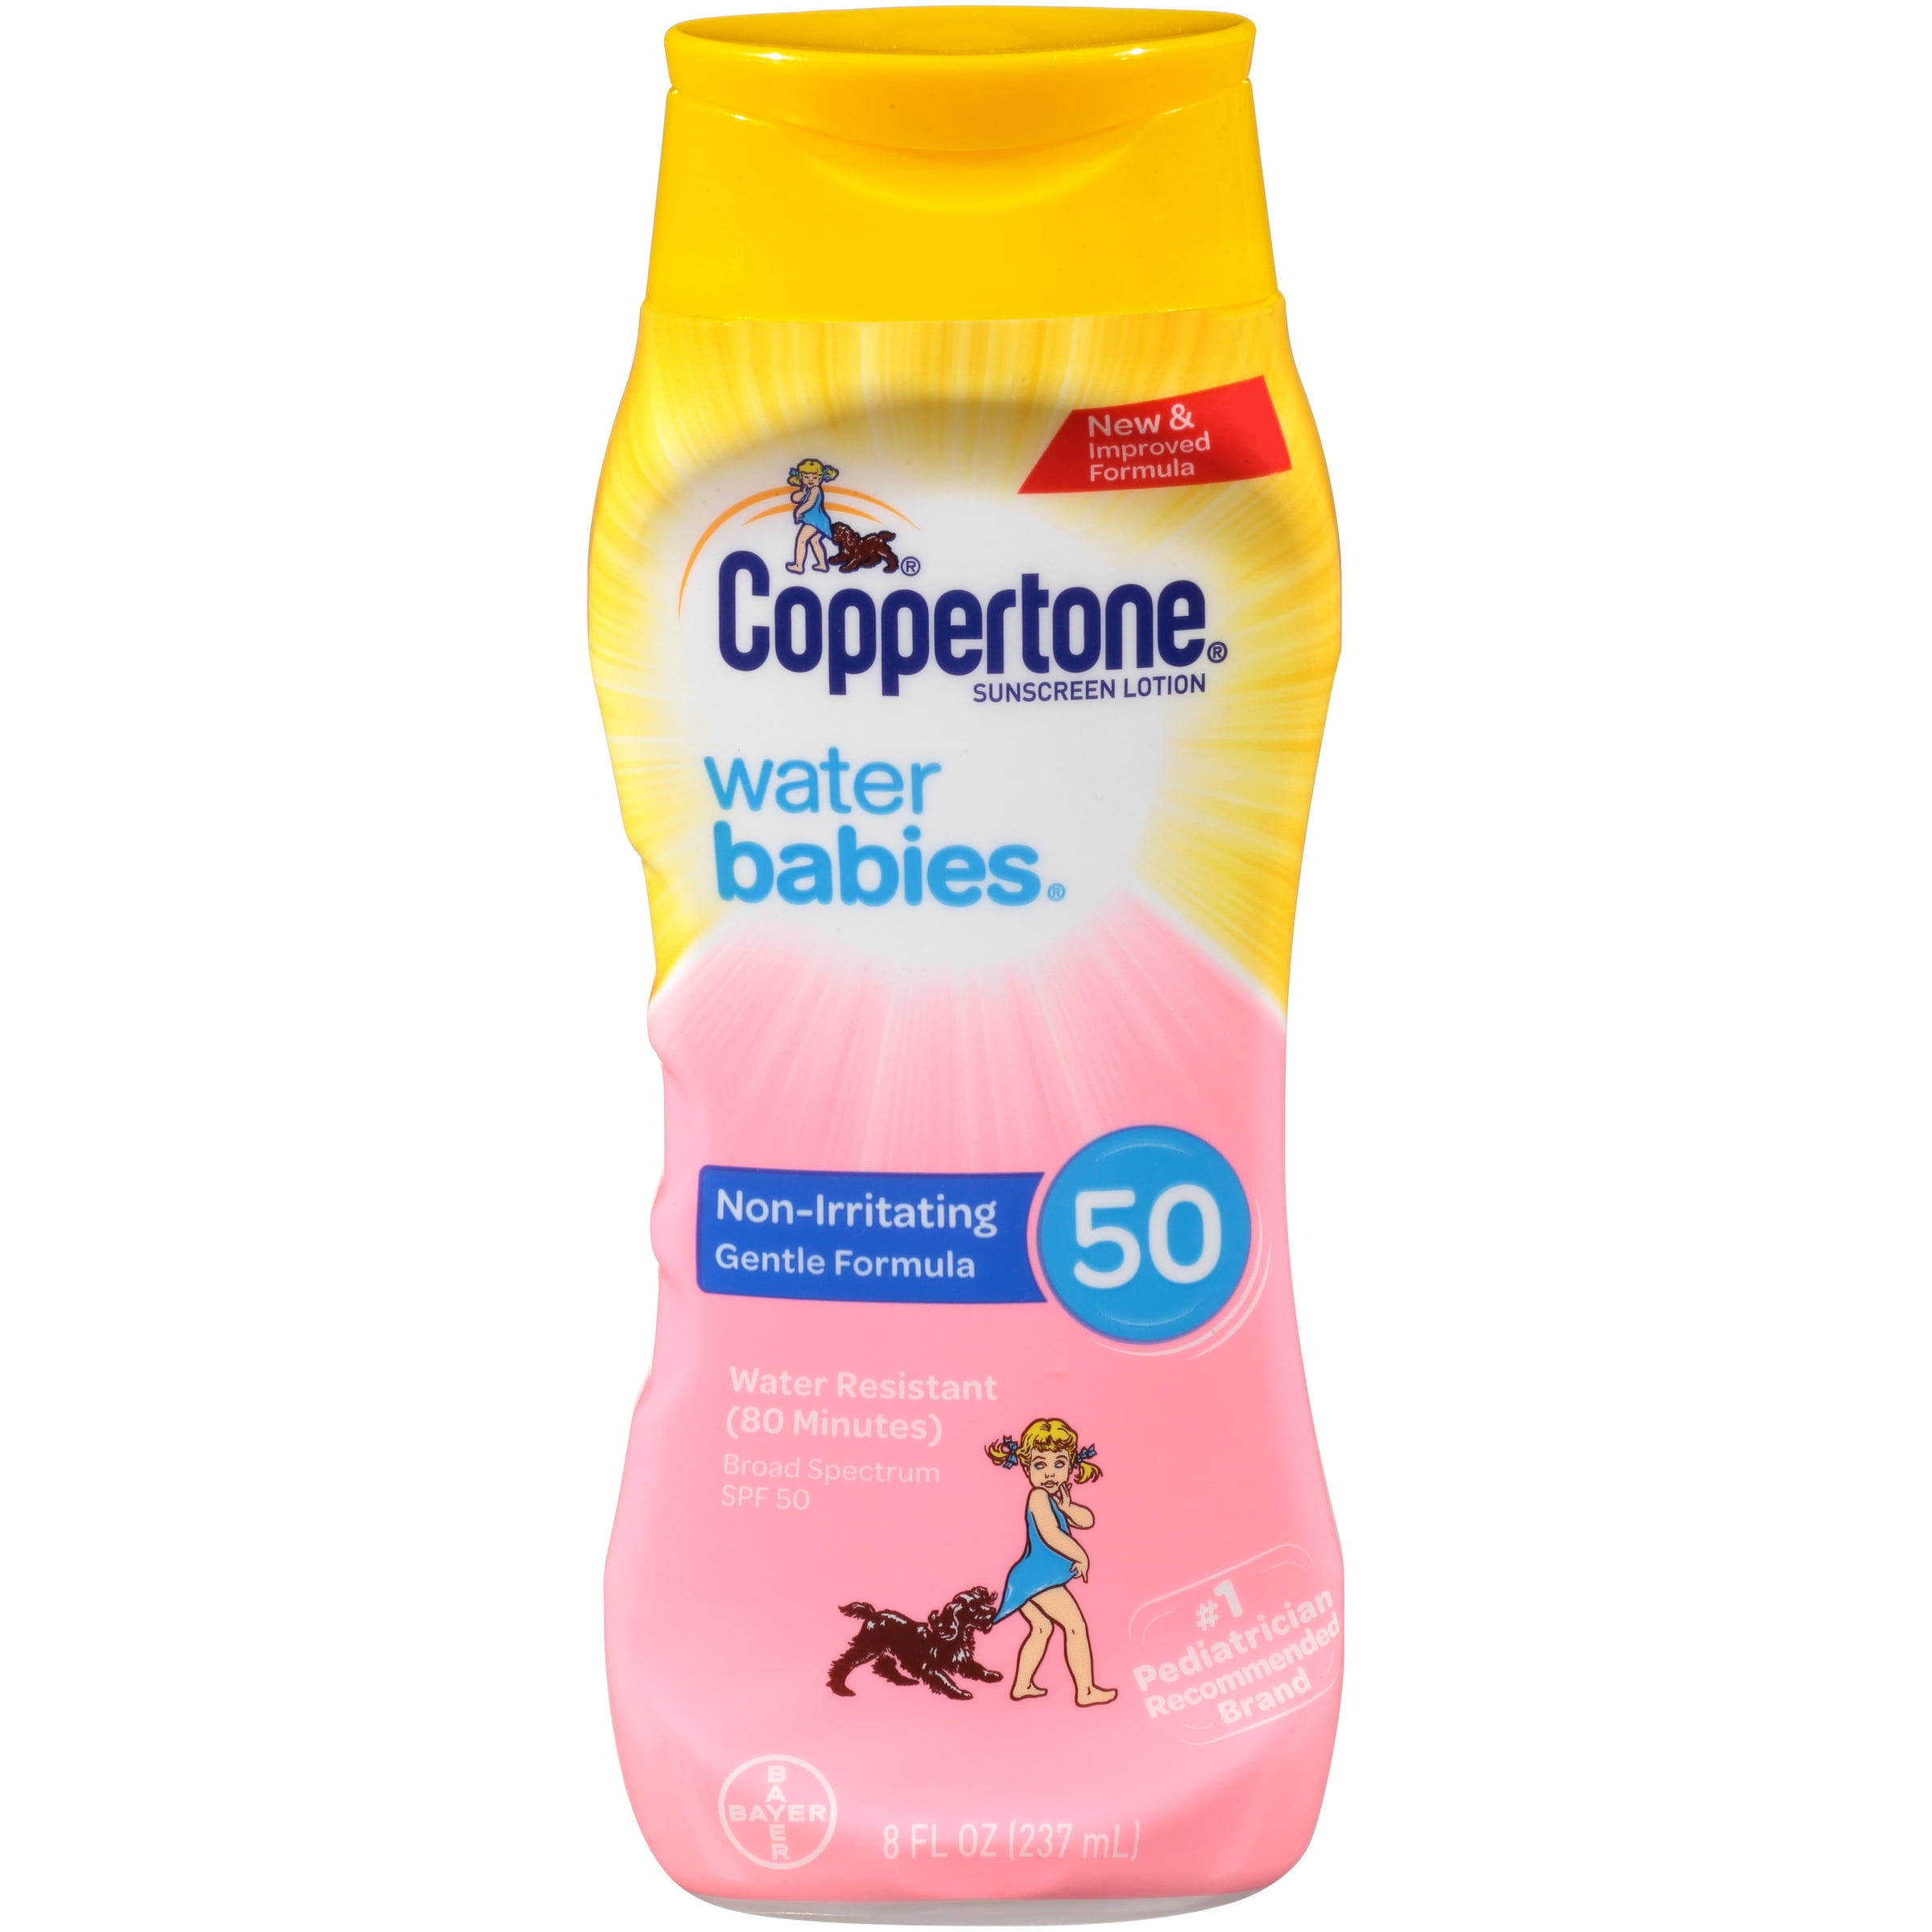 coppertone water babies pure and simple mineral based